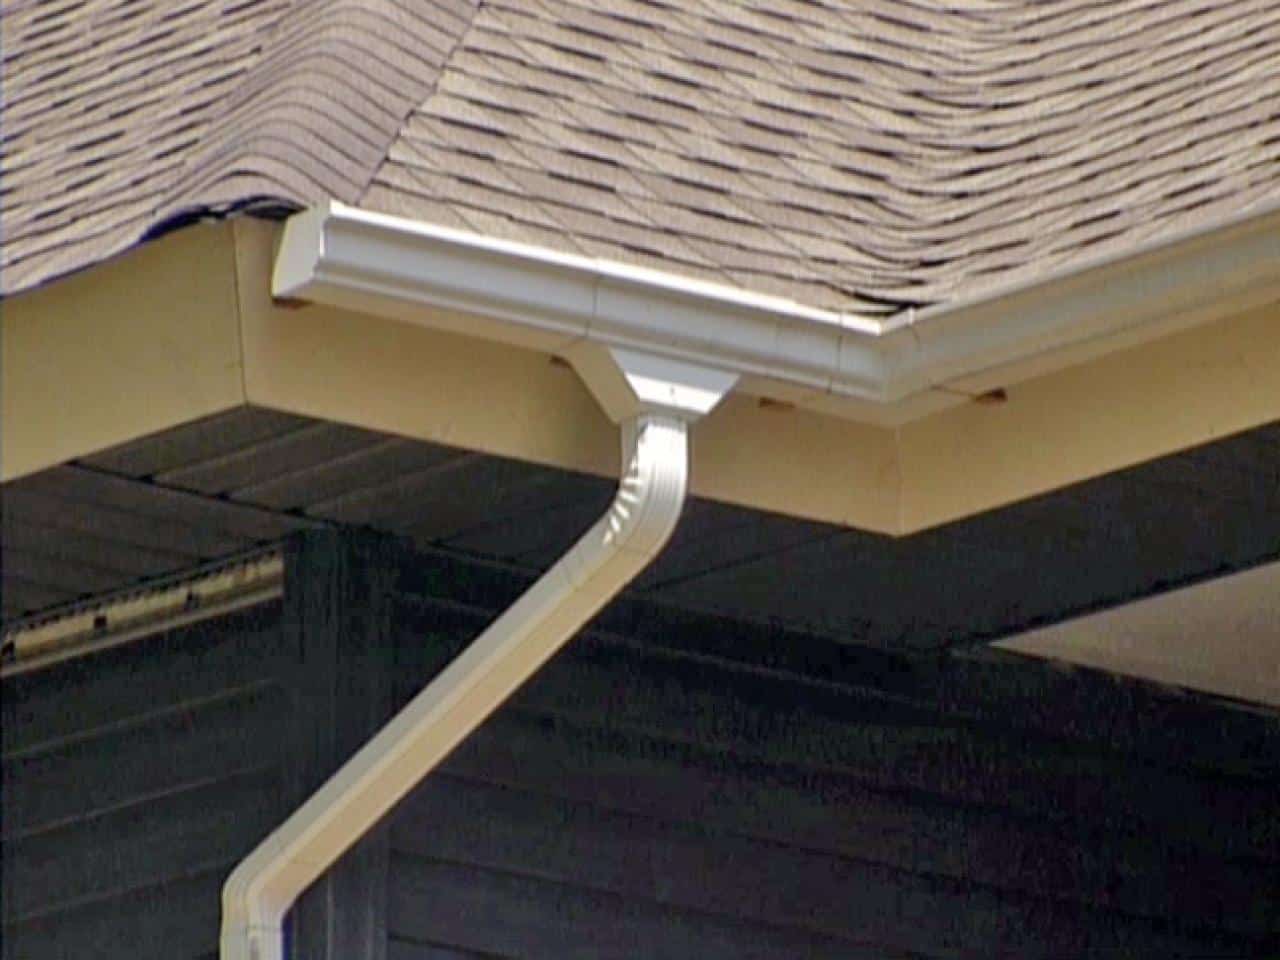 gutter gutters downspouts downspout install roof attach mycoffeepot diy amazing installation seamless exterior